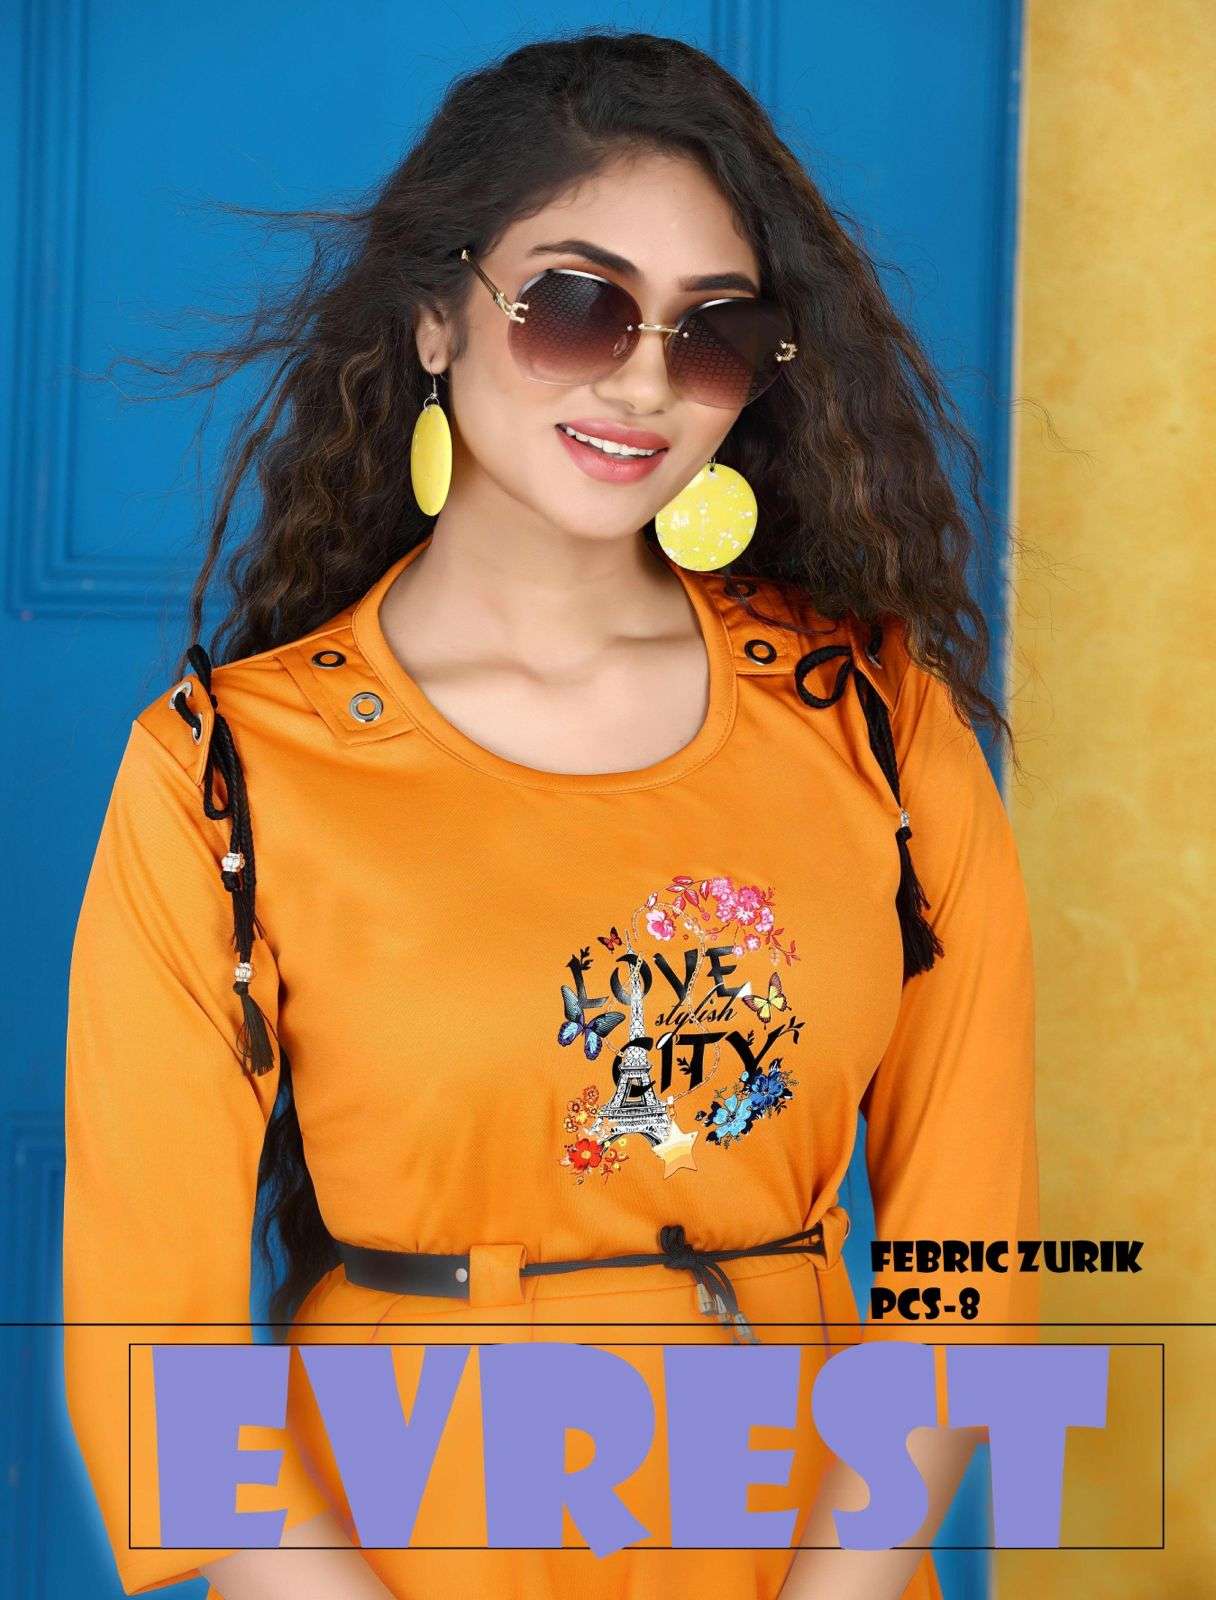 Rivaa Evrest Lycra With fancy Western style Short kurti coll...